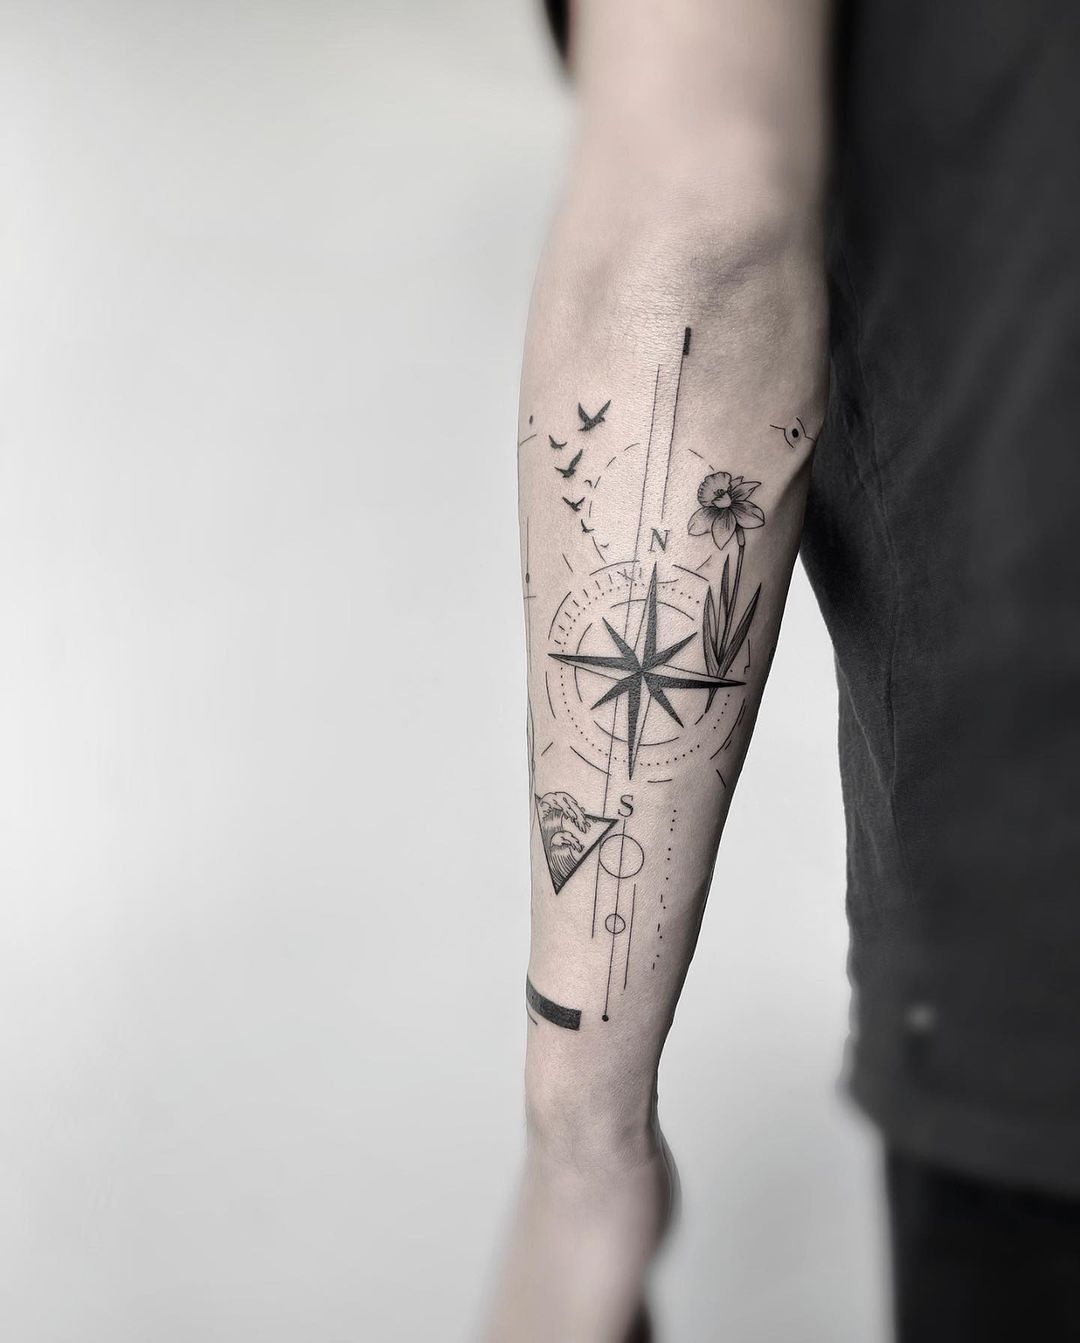 A Compass And Floral Tattoo On The Arm